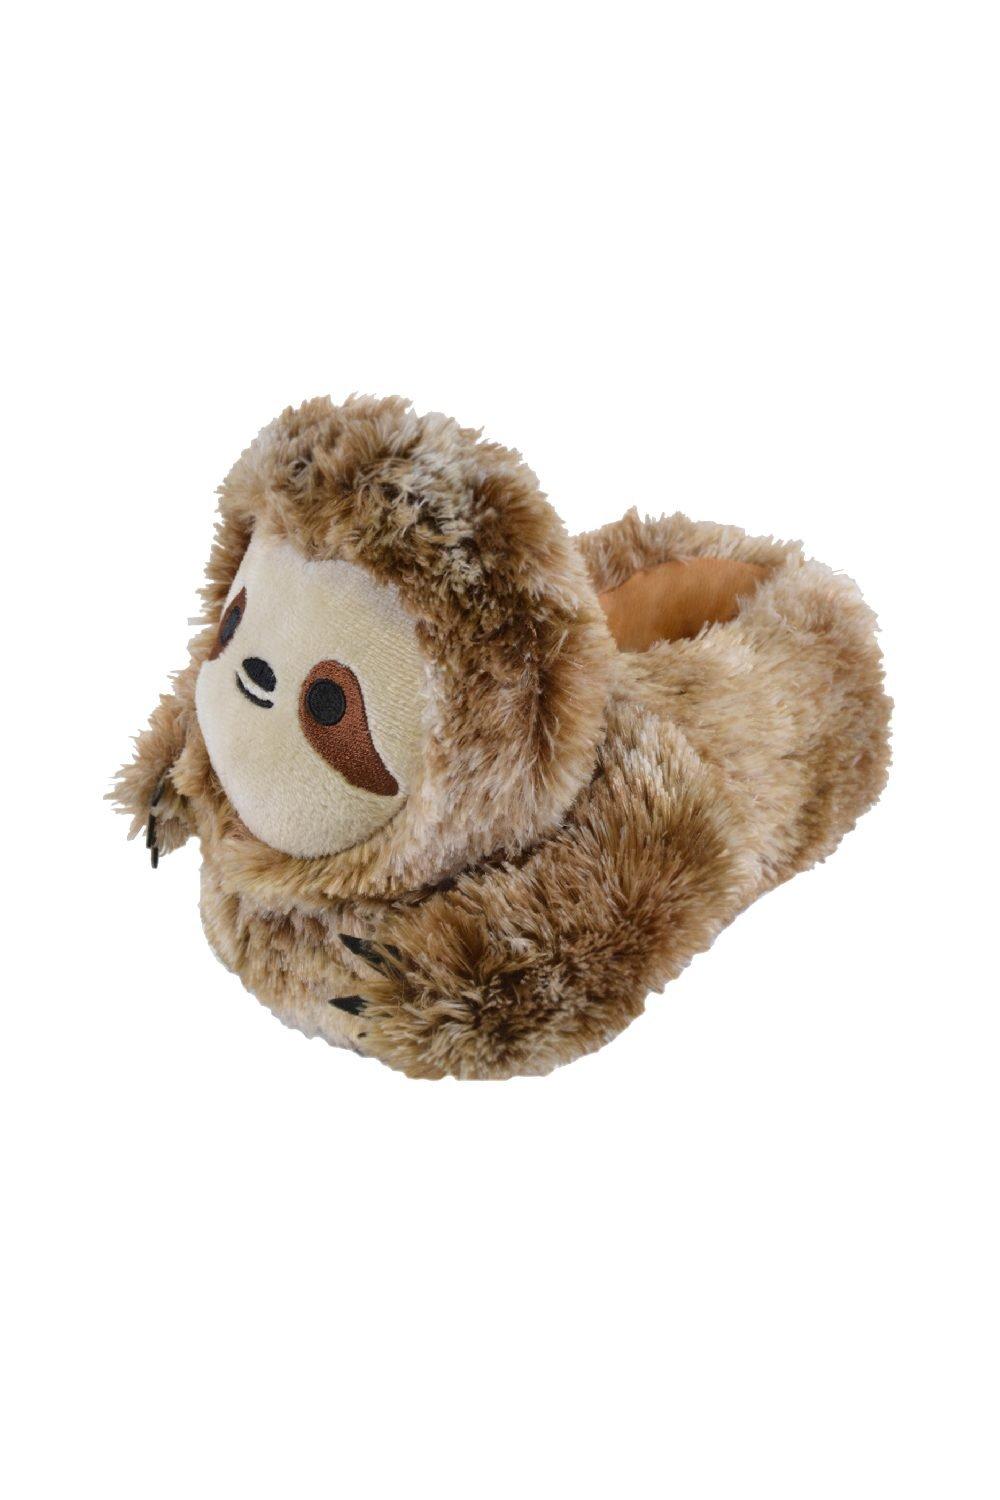 Plush Novelty 3D Sloth Slippers Great Christmas Gift